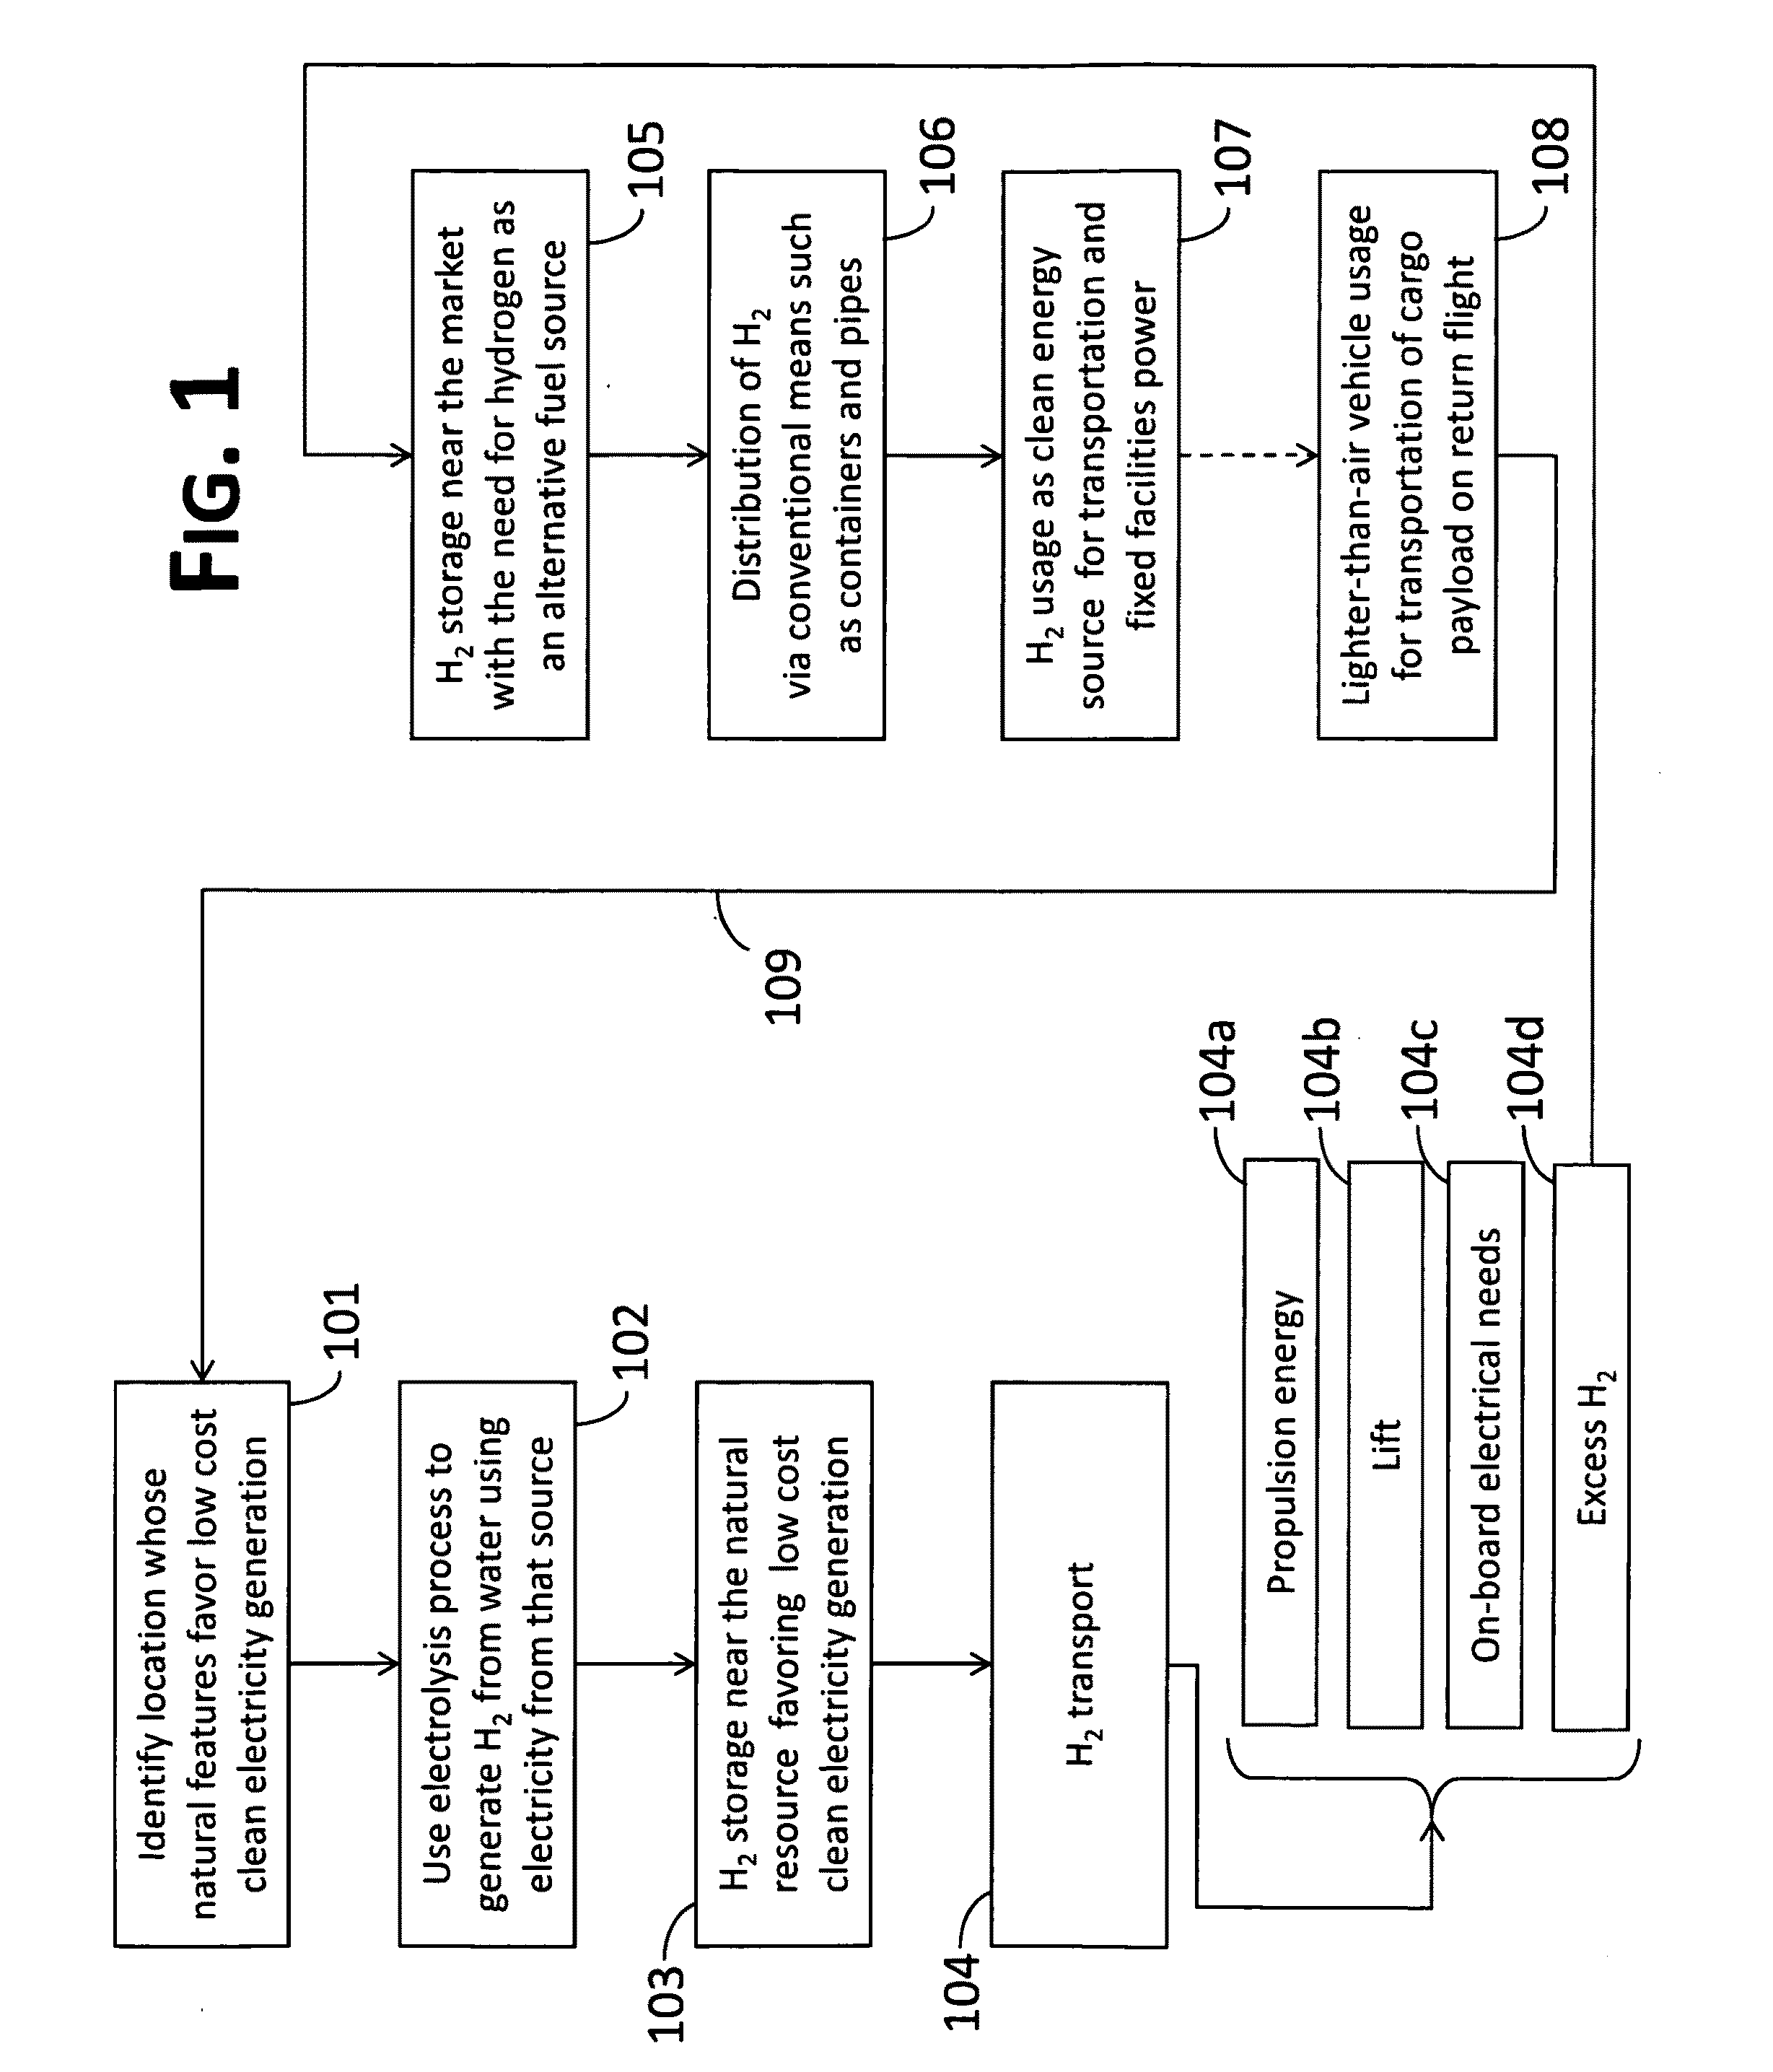 System, method and apparatus for widespread commercialization of hydrogen as a carbon-free alternative fuel source